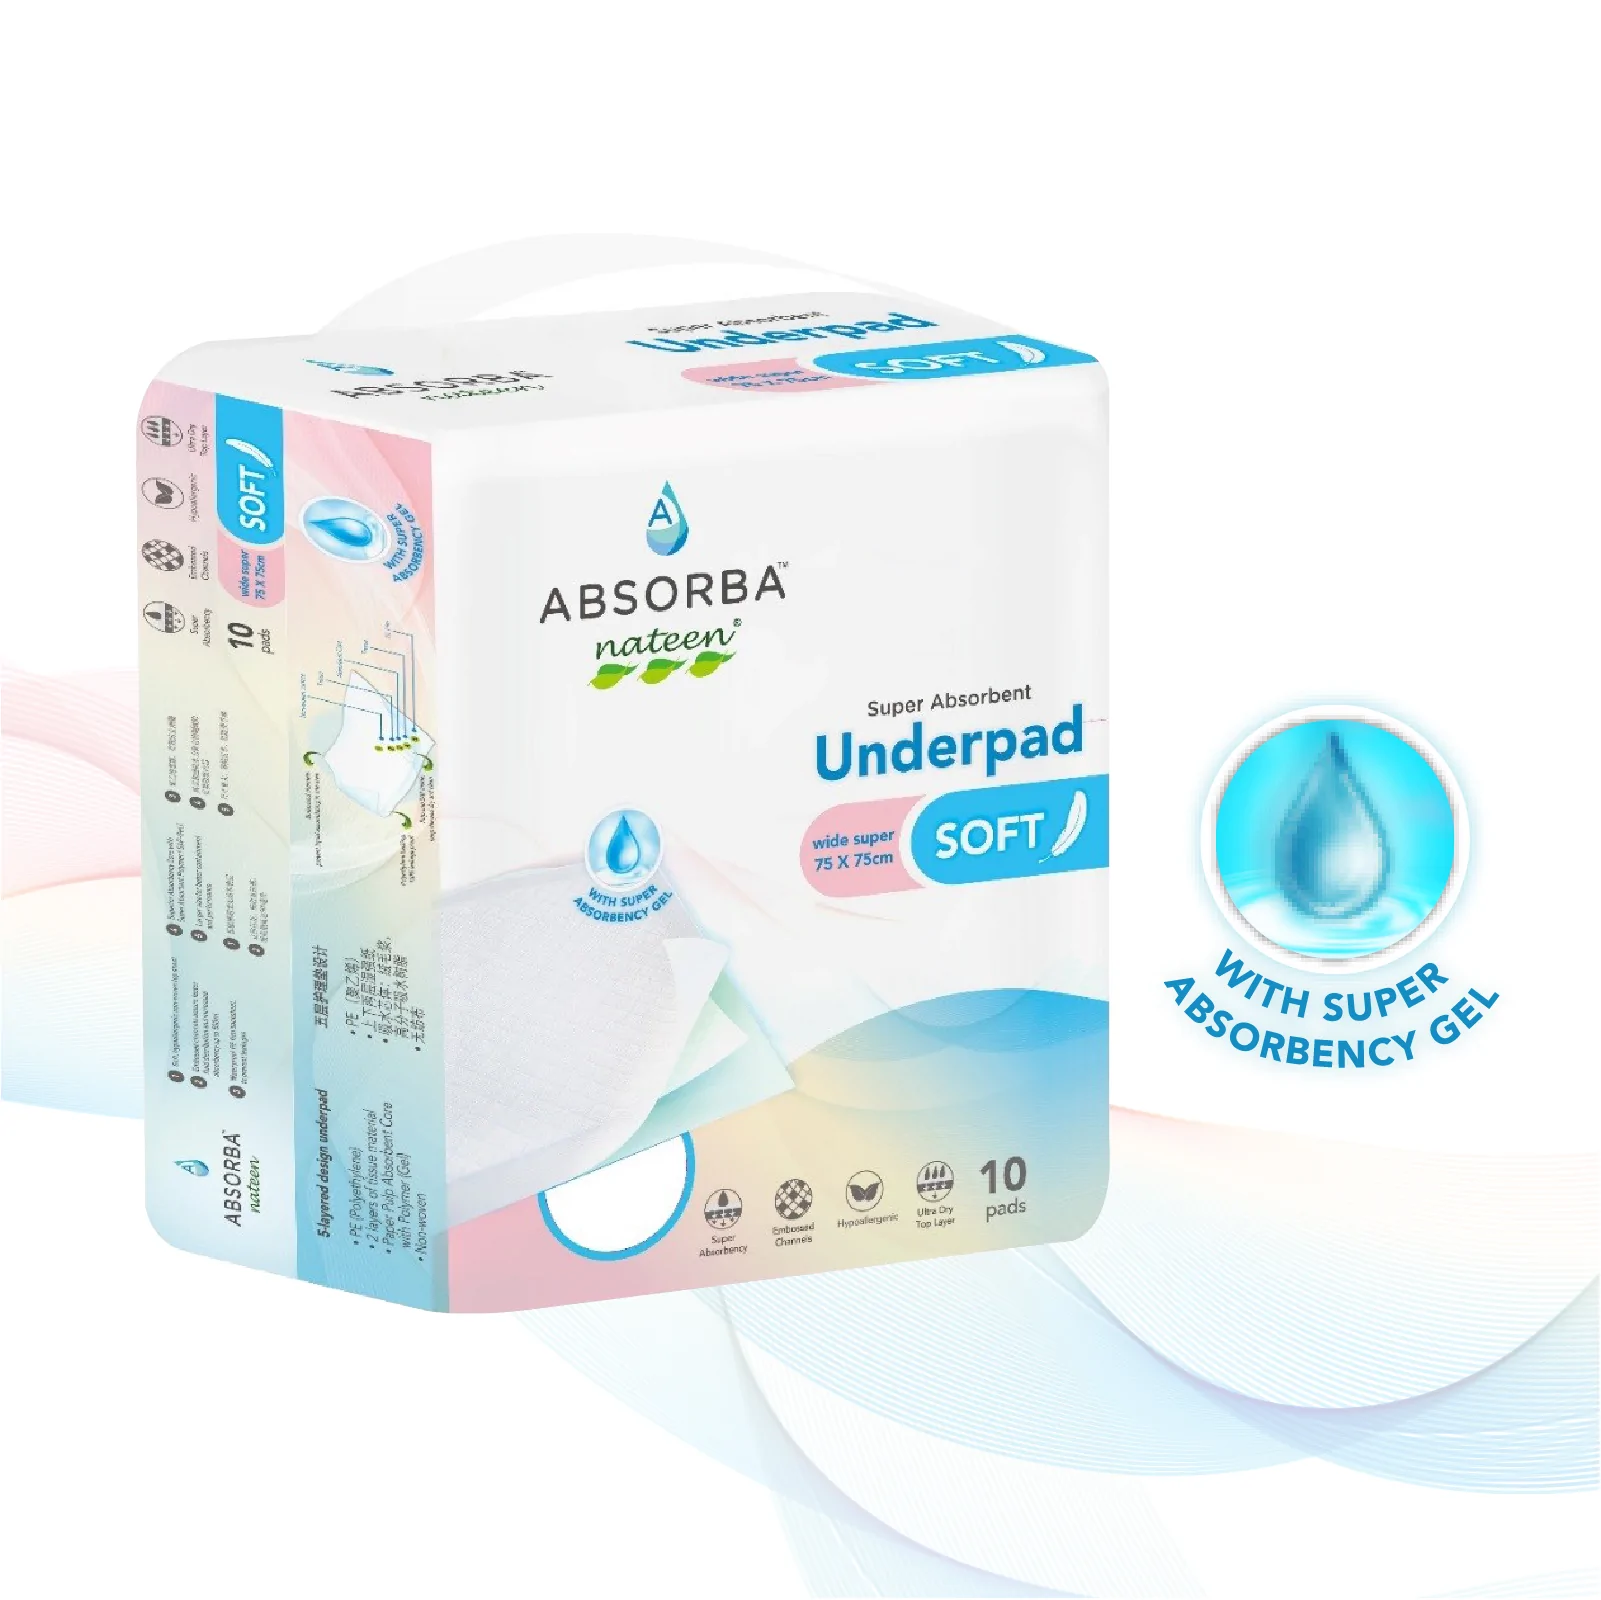 All About Adult Incontinence Underpads and How to Use Them